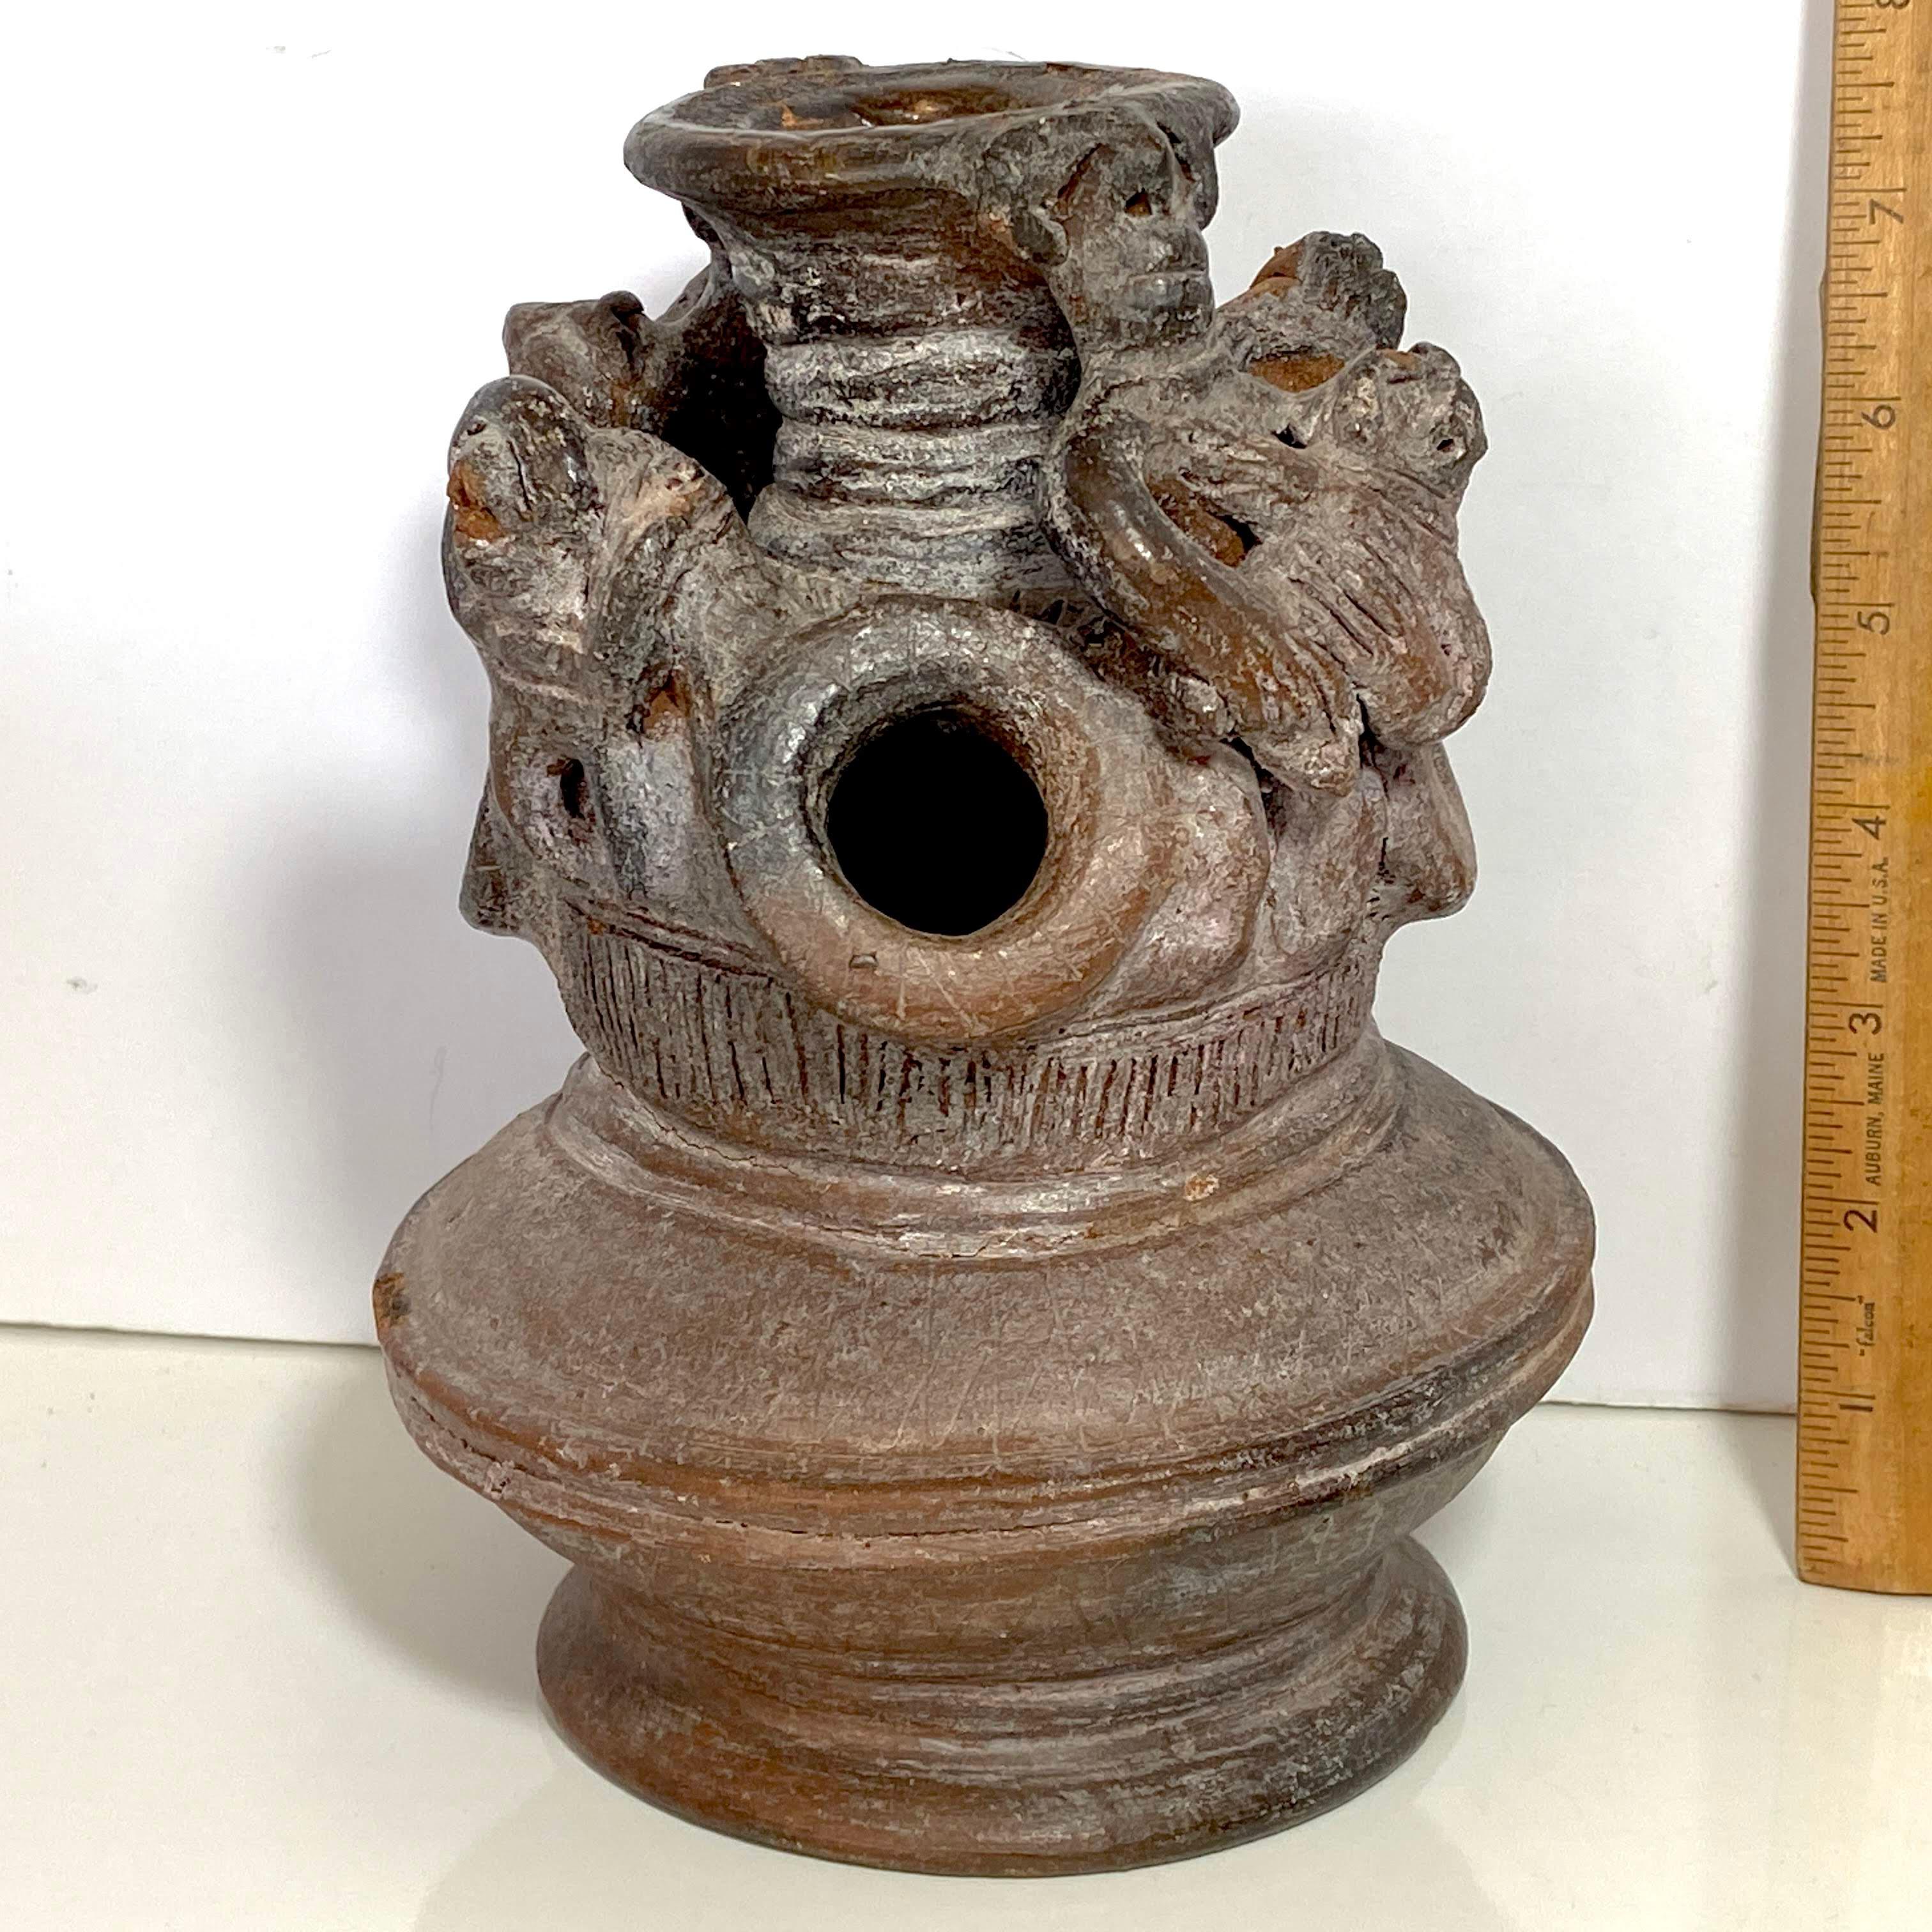 Early Pottery Vessel with Multiple Holes & Hand Carved Figures